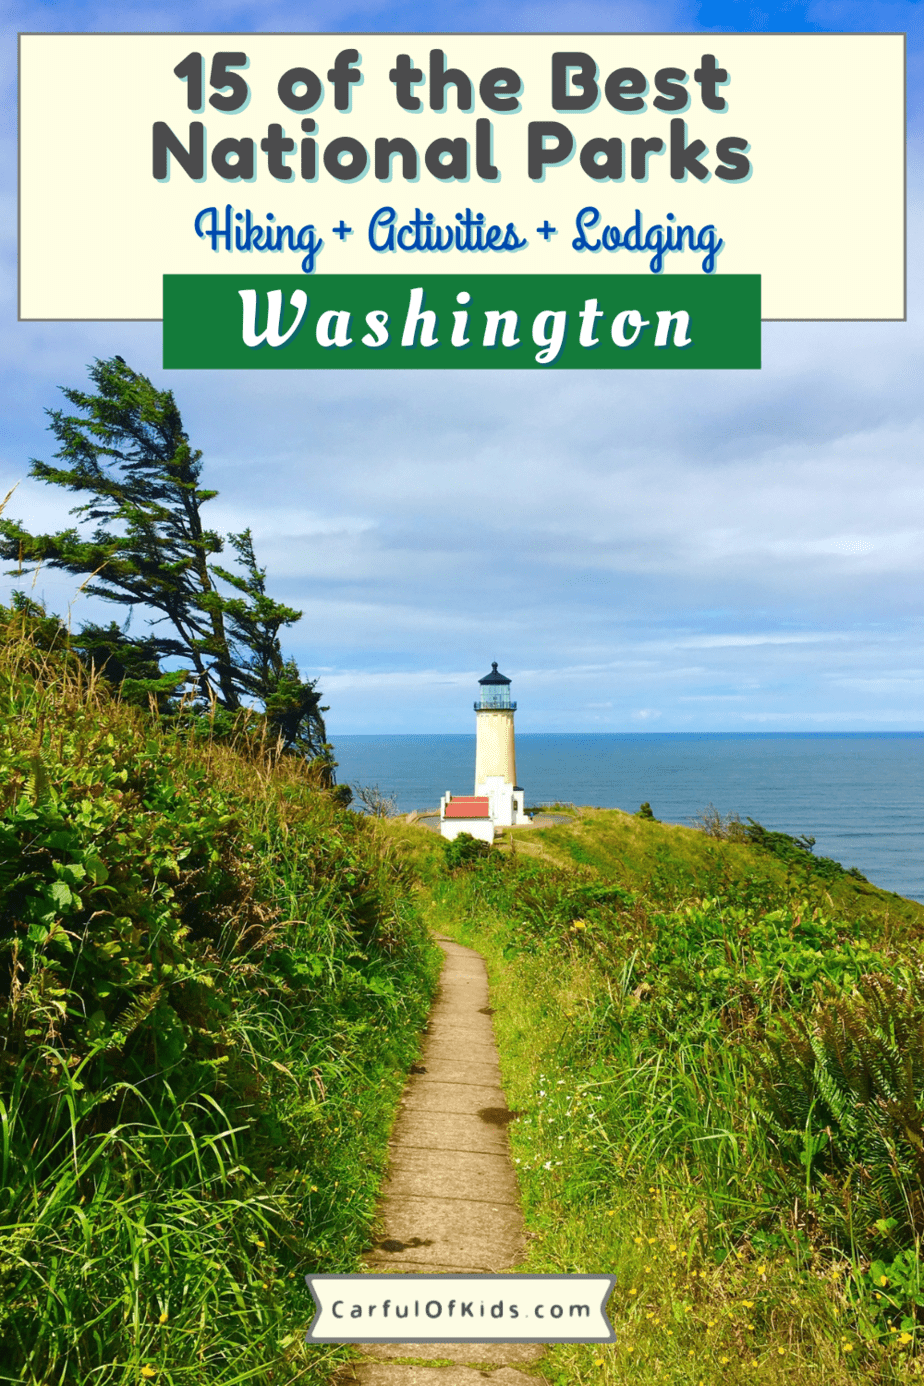 Washington offers 15 National Park Service Sites to explore on your next getaway. Find temperate rainforests, evergreen forests along with historical sites and volcanic sites. Many of the NPS sites are close to Seattle too What are the National Park sites in Washington | National Parks close to Seattle. #NPS #NationalParks